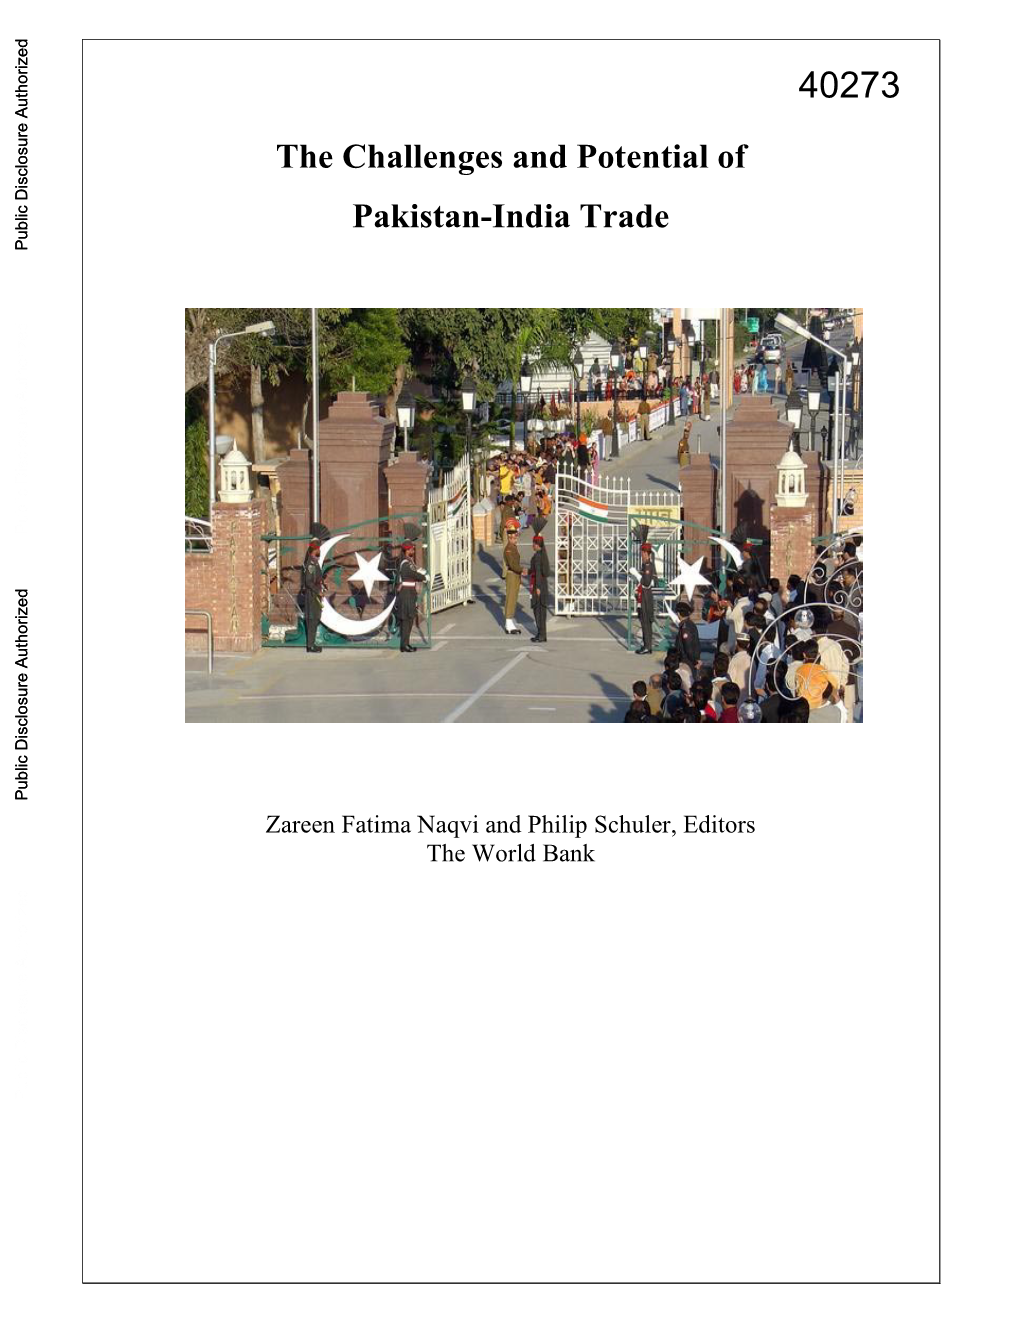 The Challenges and Potential of Pakistan-India Trade Public Disclosure Authorized